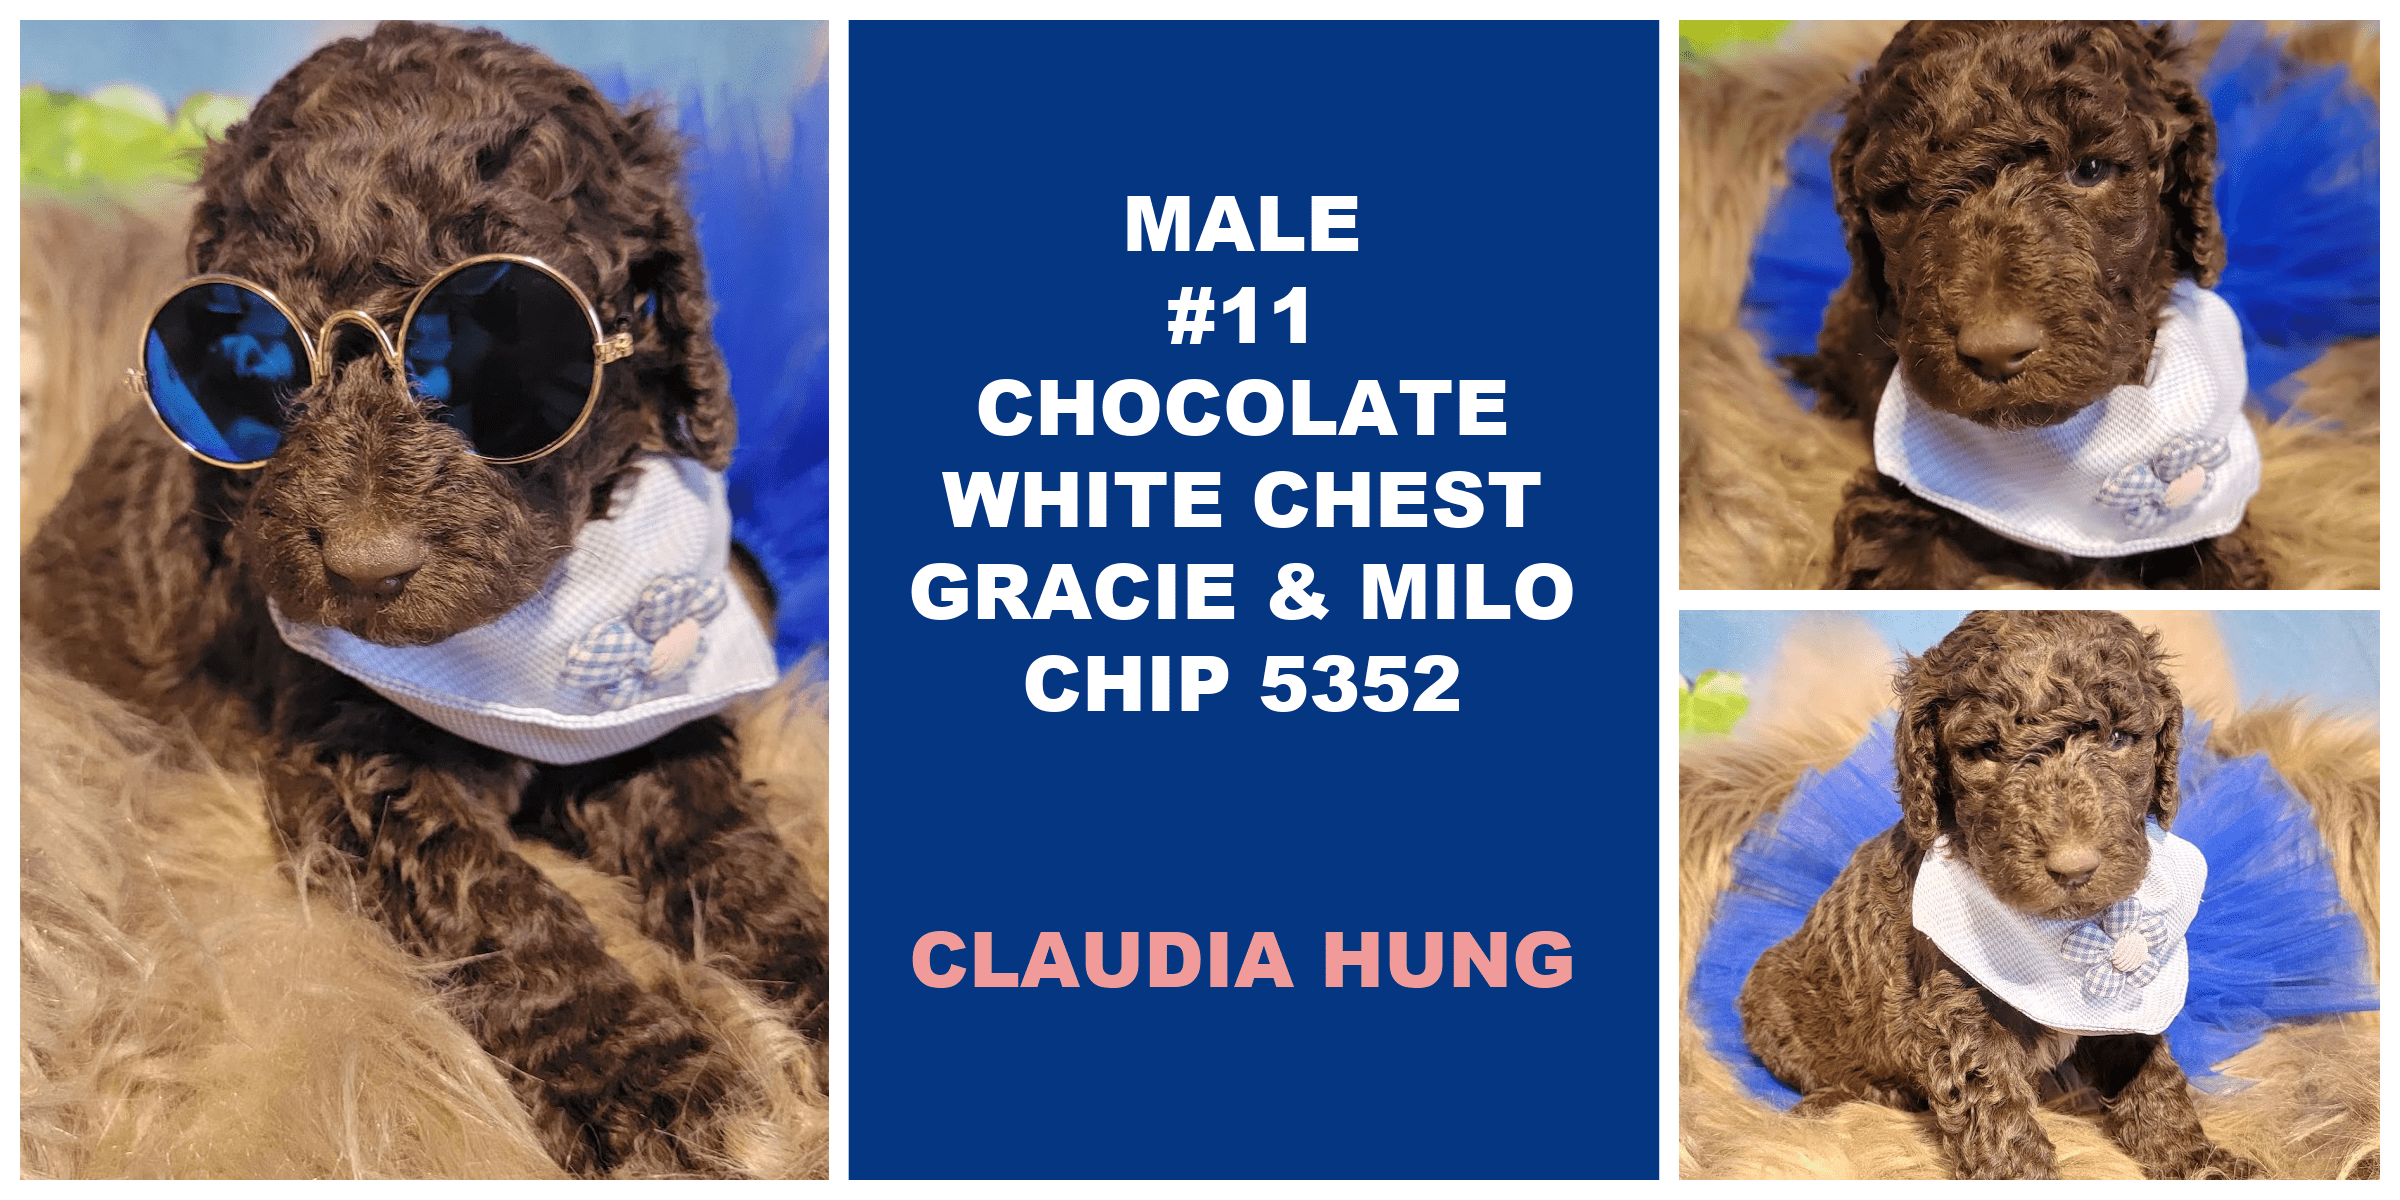 MALE 11 CHOCOLATE WHITE CHEST GRACIE MILO CHIP 5352 CLAUDIA HUNG